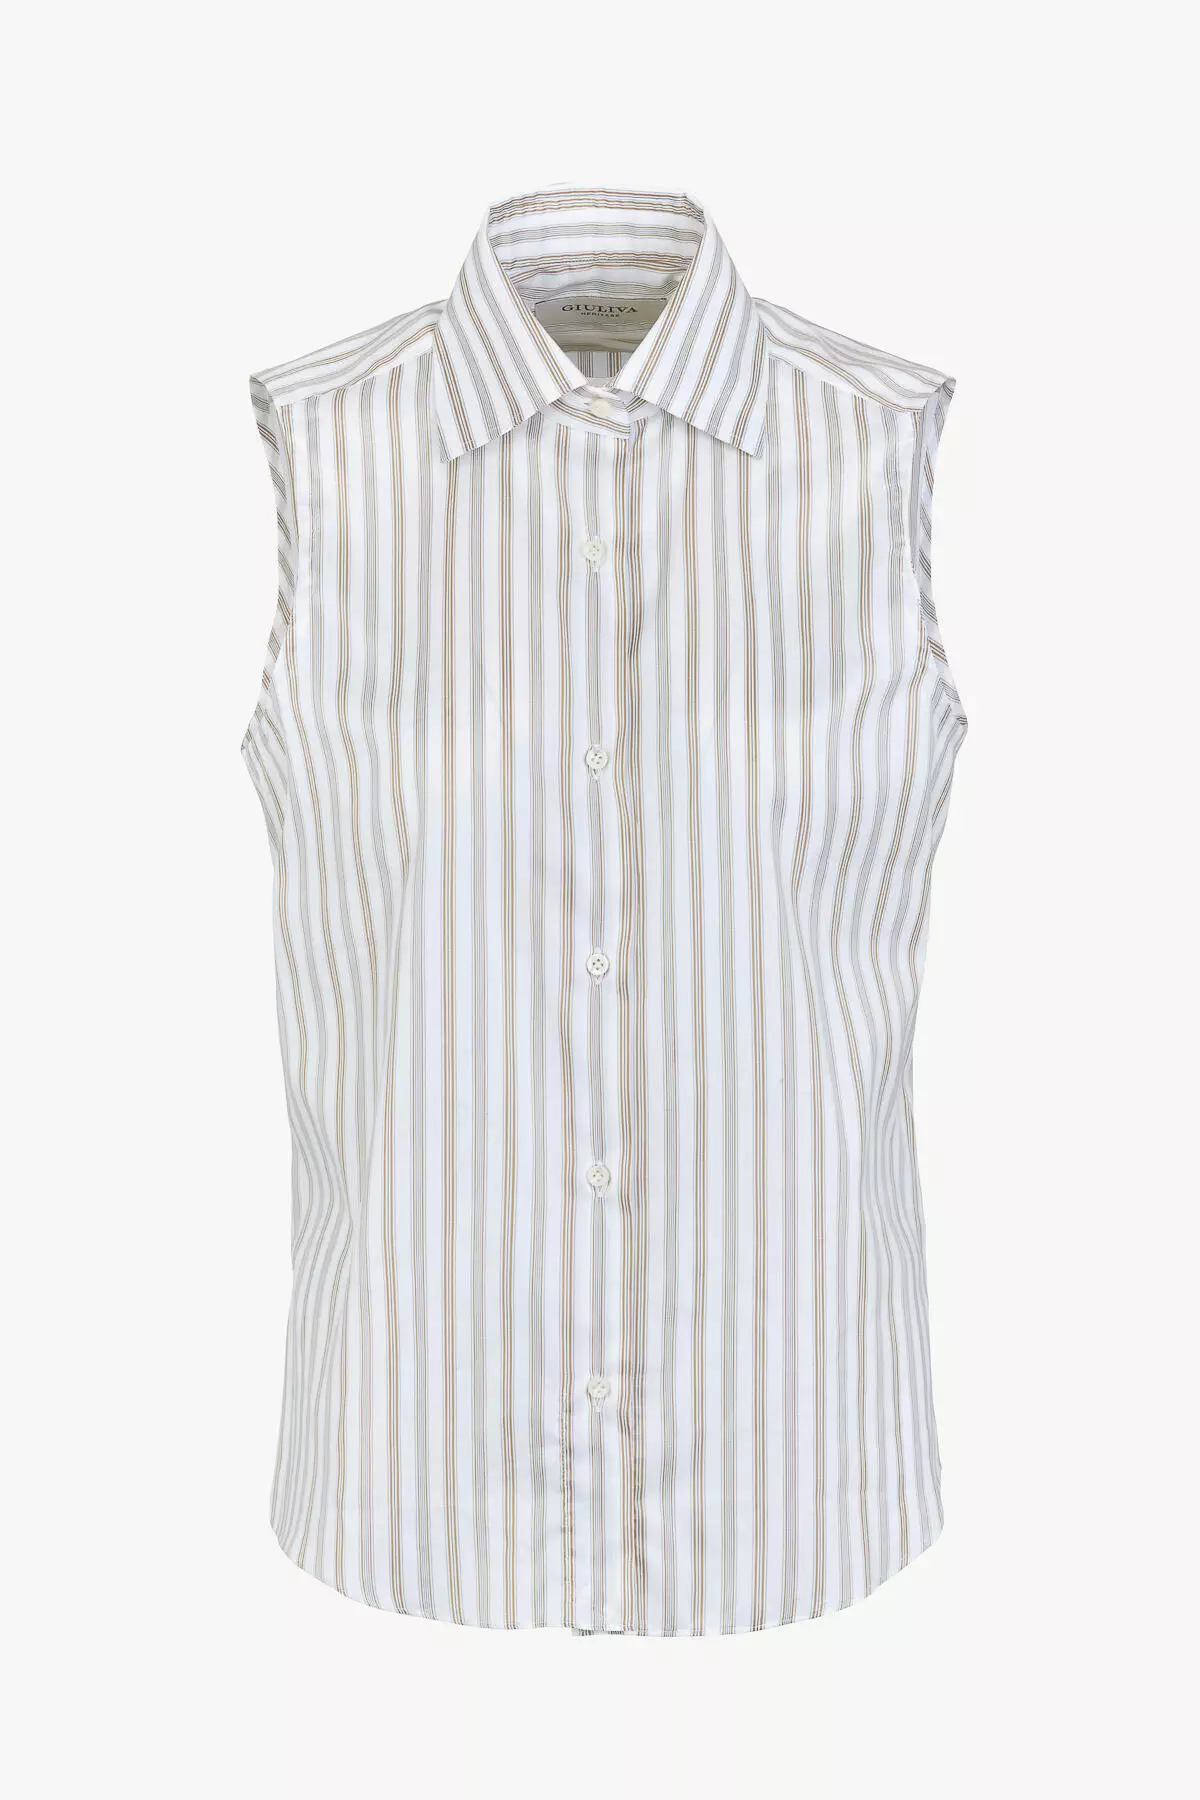 The Melissa Shirt Cotton and Silk White, Green & Mustard Stripes front